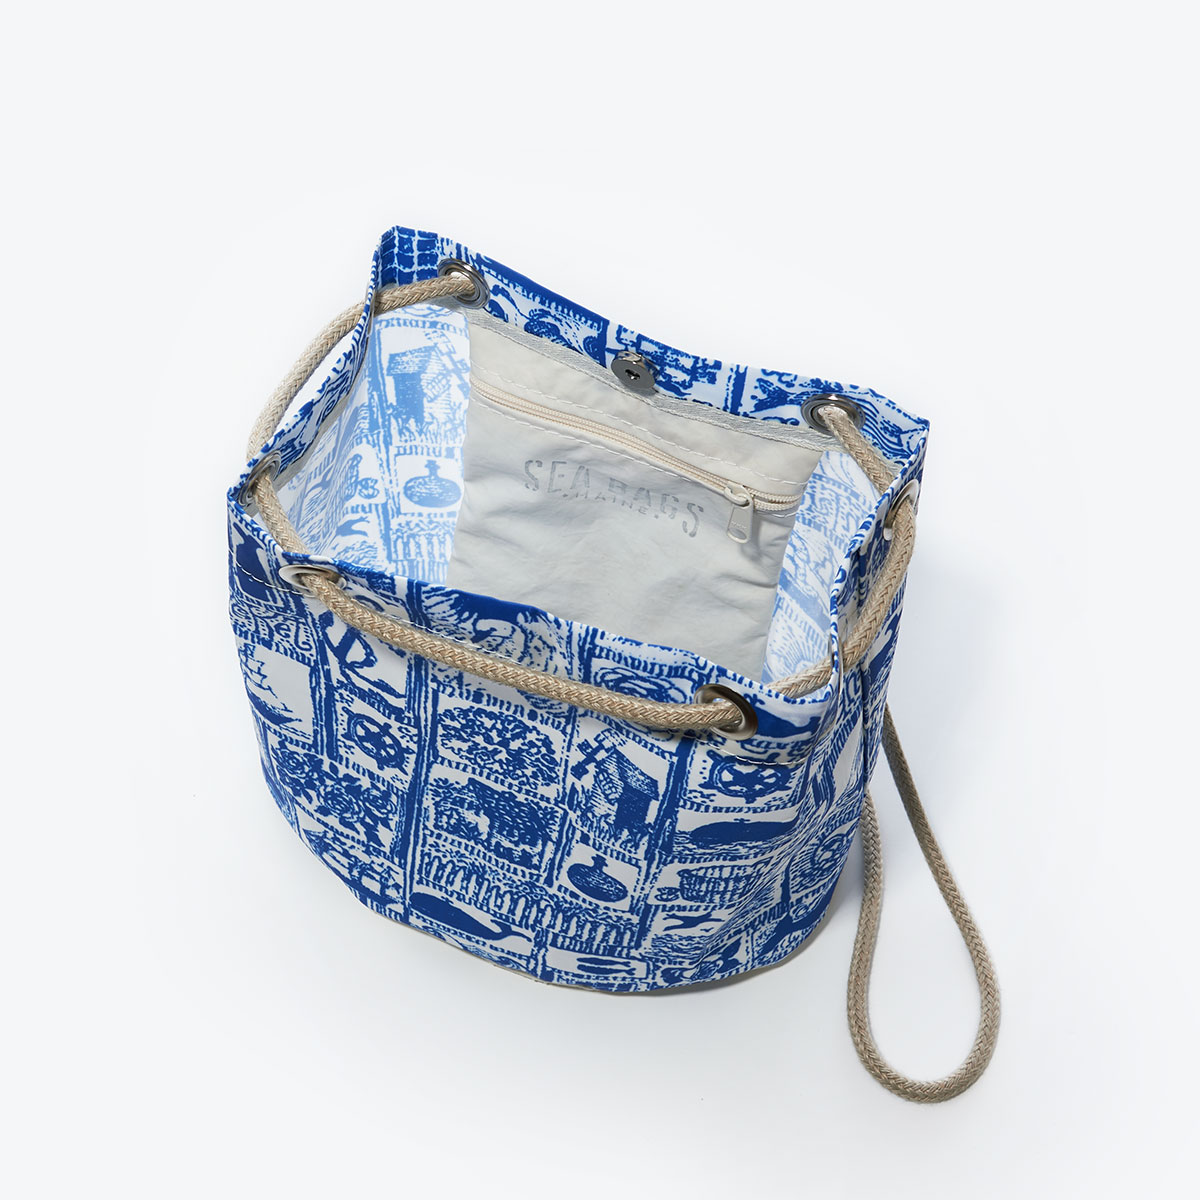 inside view of blue squares filled with various nautical imagery printed on recycled sail cloth convertible bucket bag with hemp dock line straps